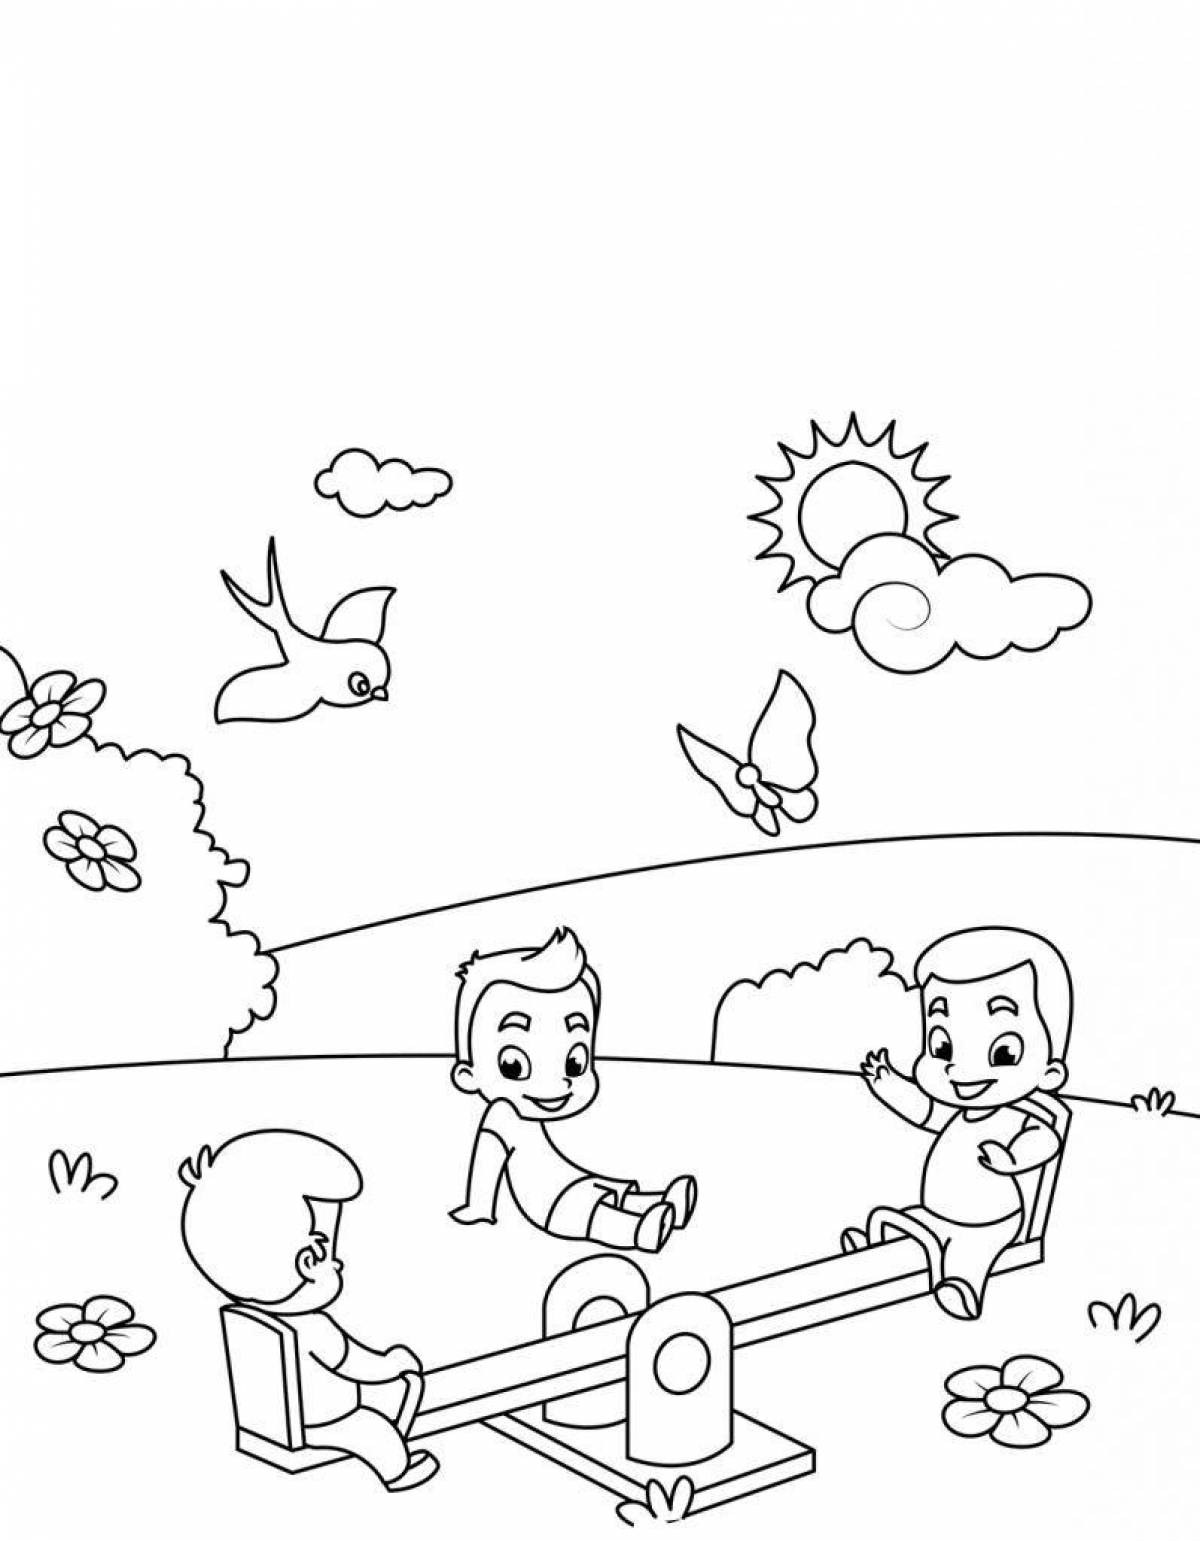 Coloring page area color-explosion